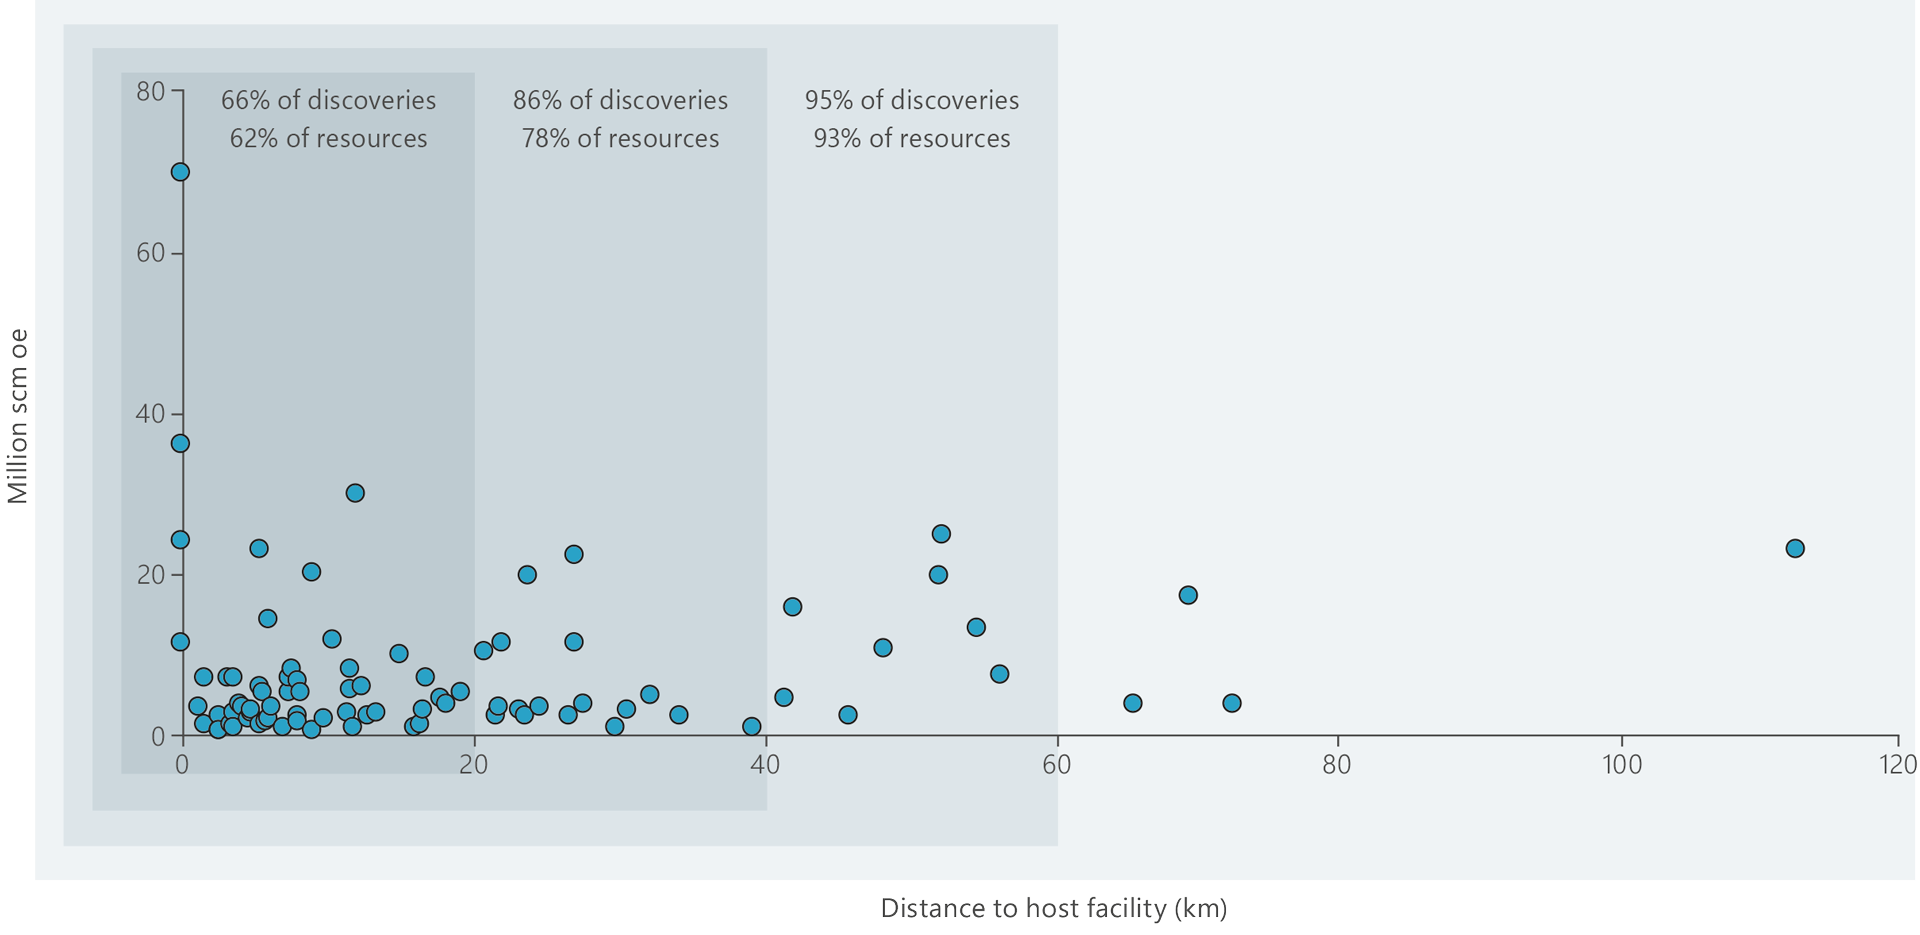 A scatter chart illustrating resources and distance from possible host facilities for discoveries in the portfolio